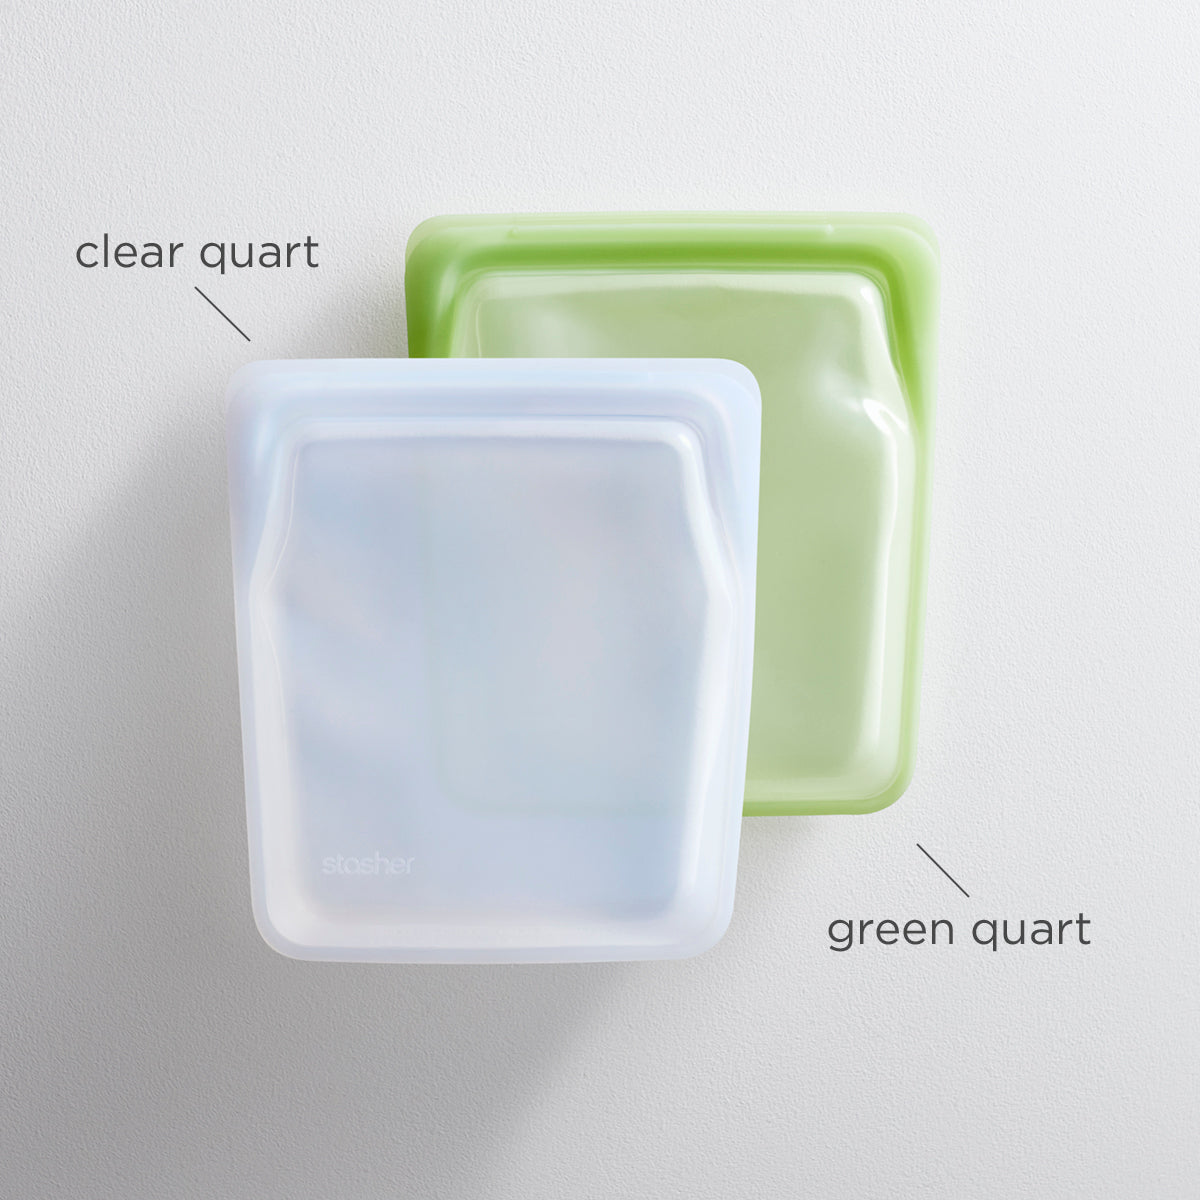 clear/green: Reusable Silicone Stasher Quart Bag Duo Clear & Green